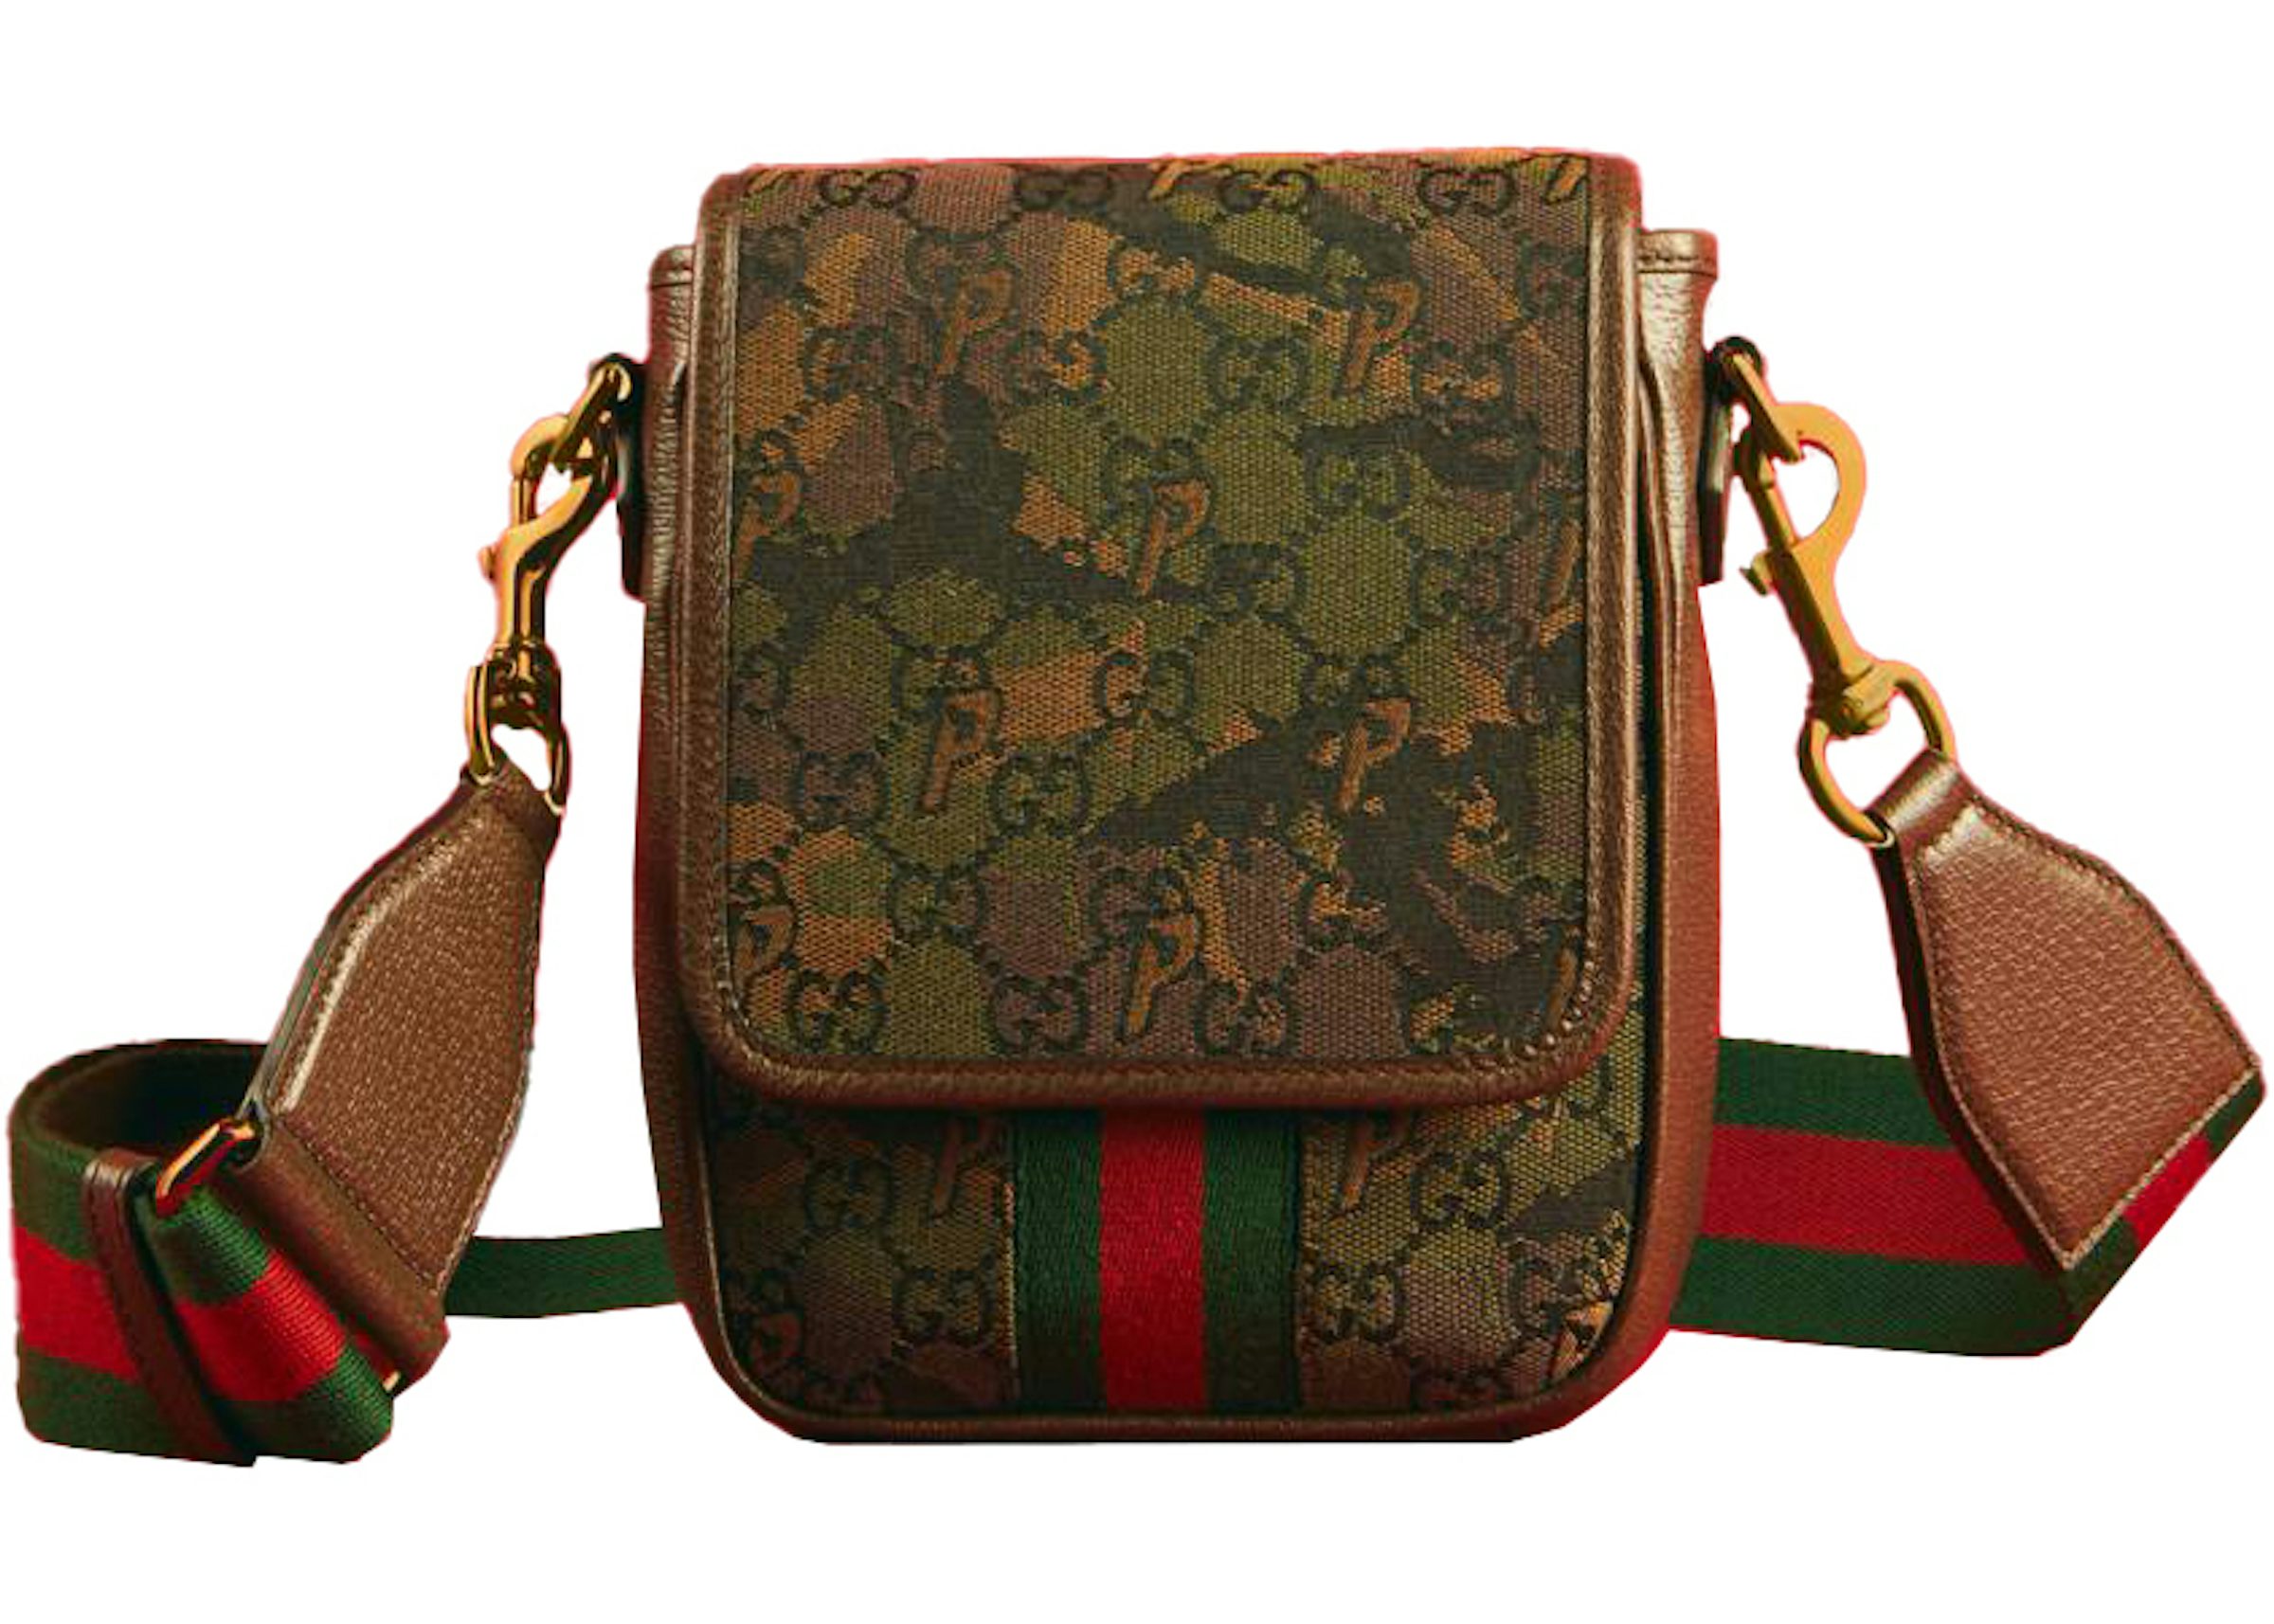 Palace x Gucci Web Canvas GG-P Messenger Bag Camouflage in GG